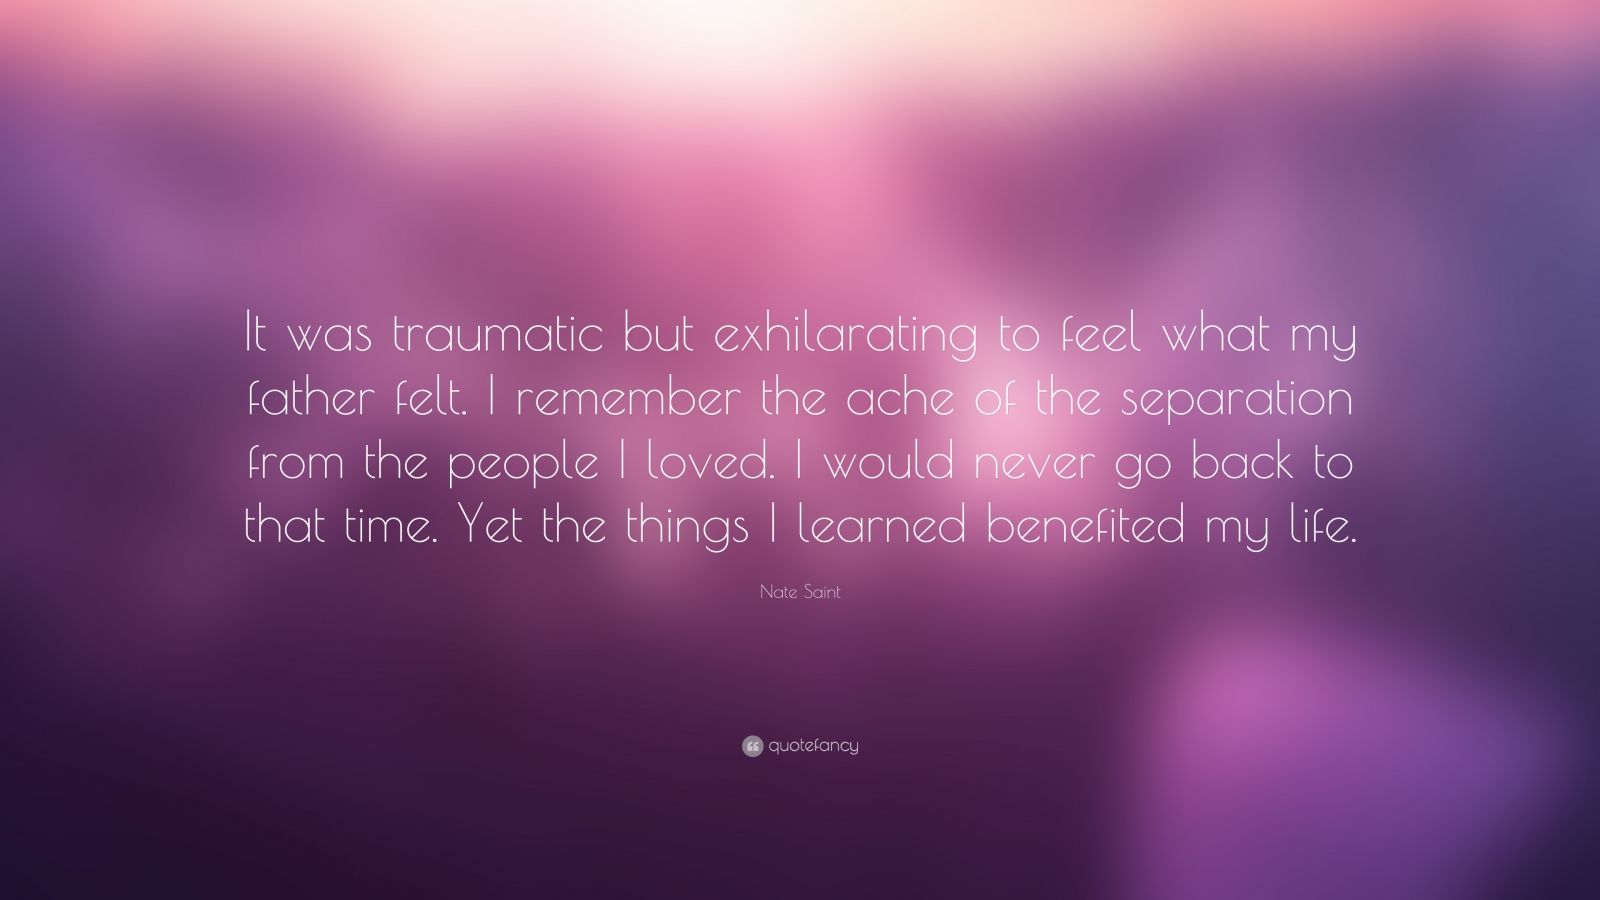 Nate Saint Quote: “It was traumatic but exhilarating to feel what my ...